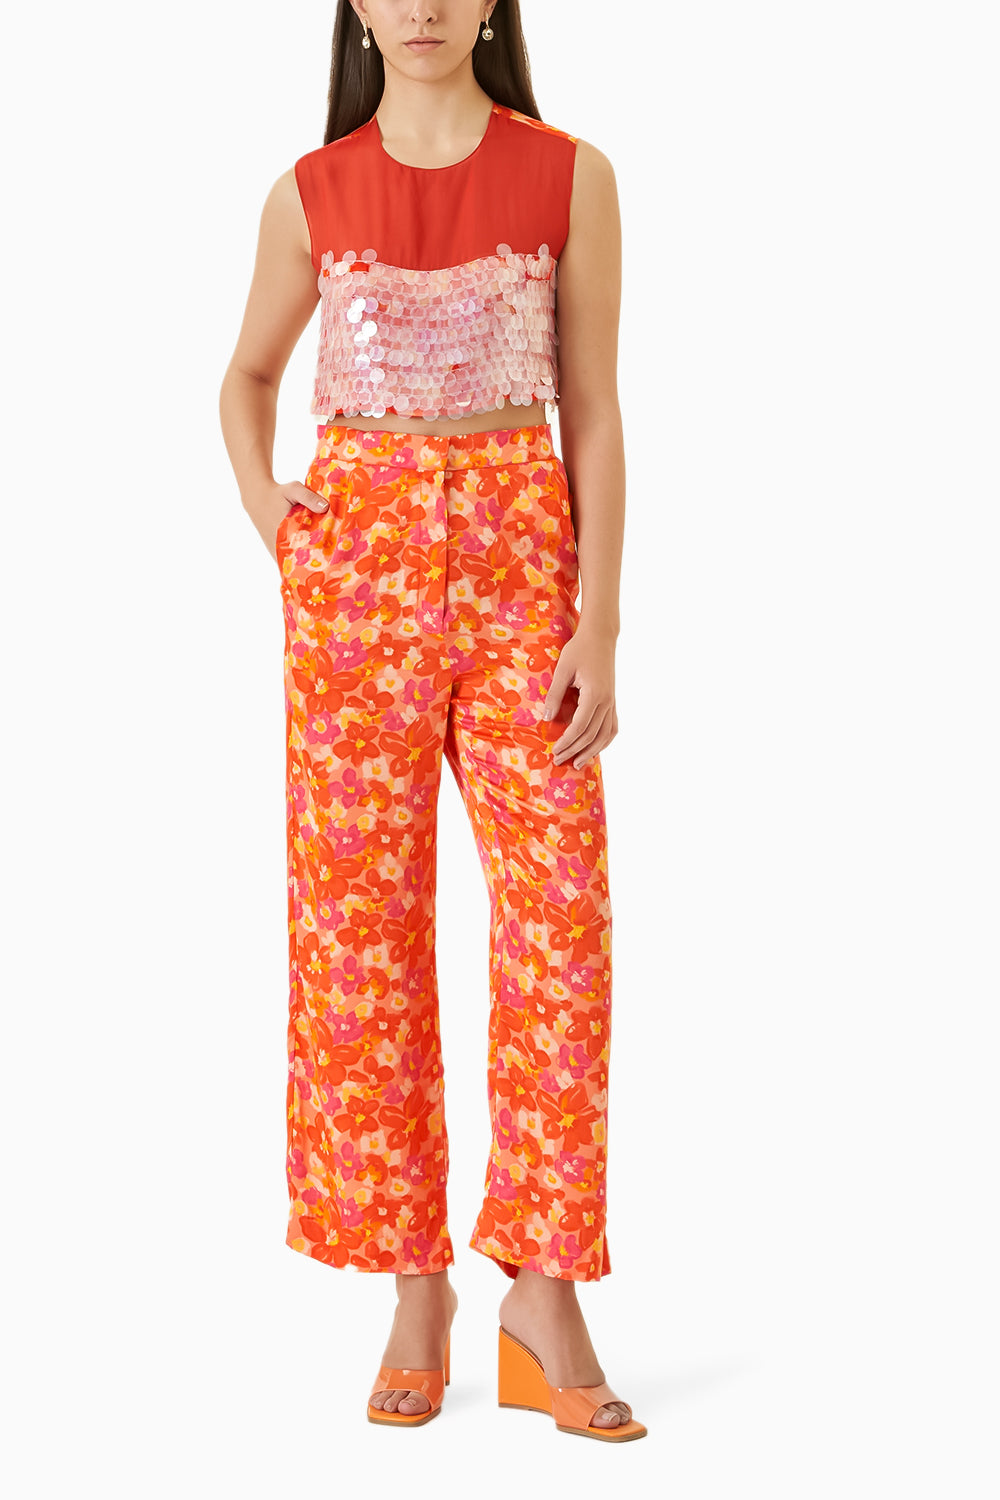 Poppy Crop Top and Trousers Co-ord